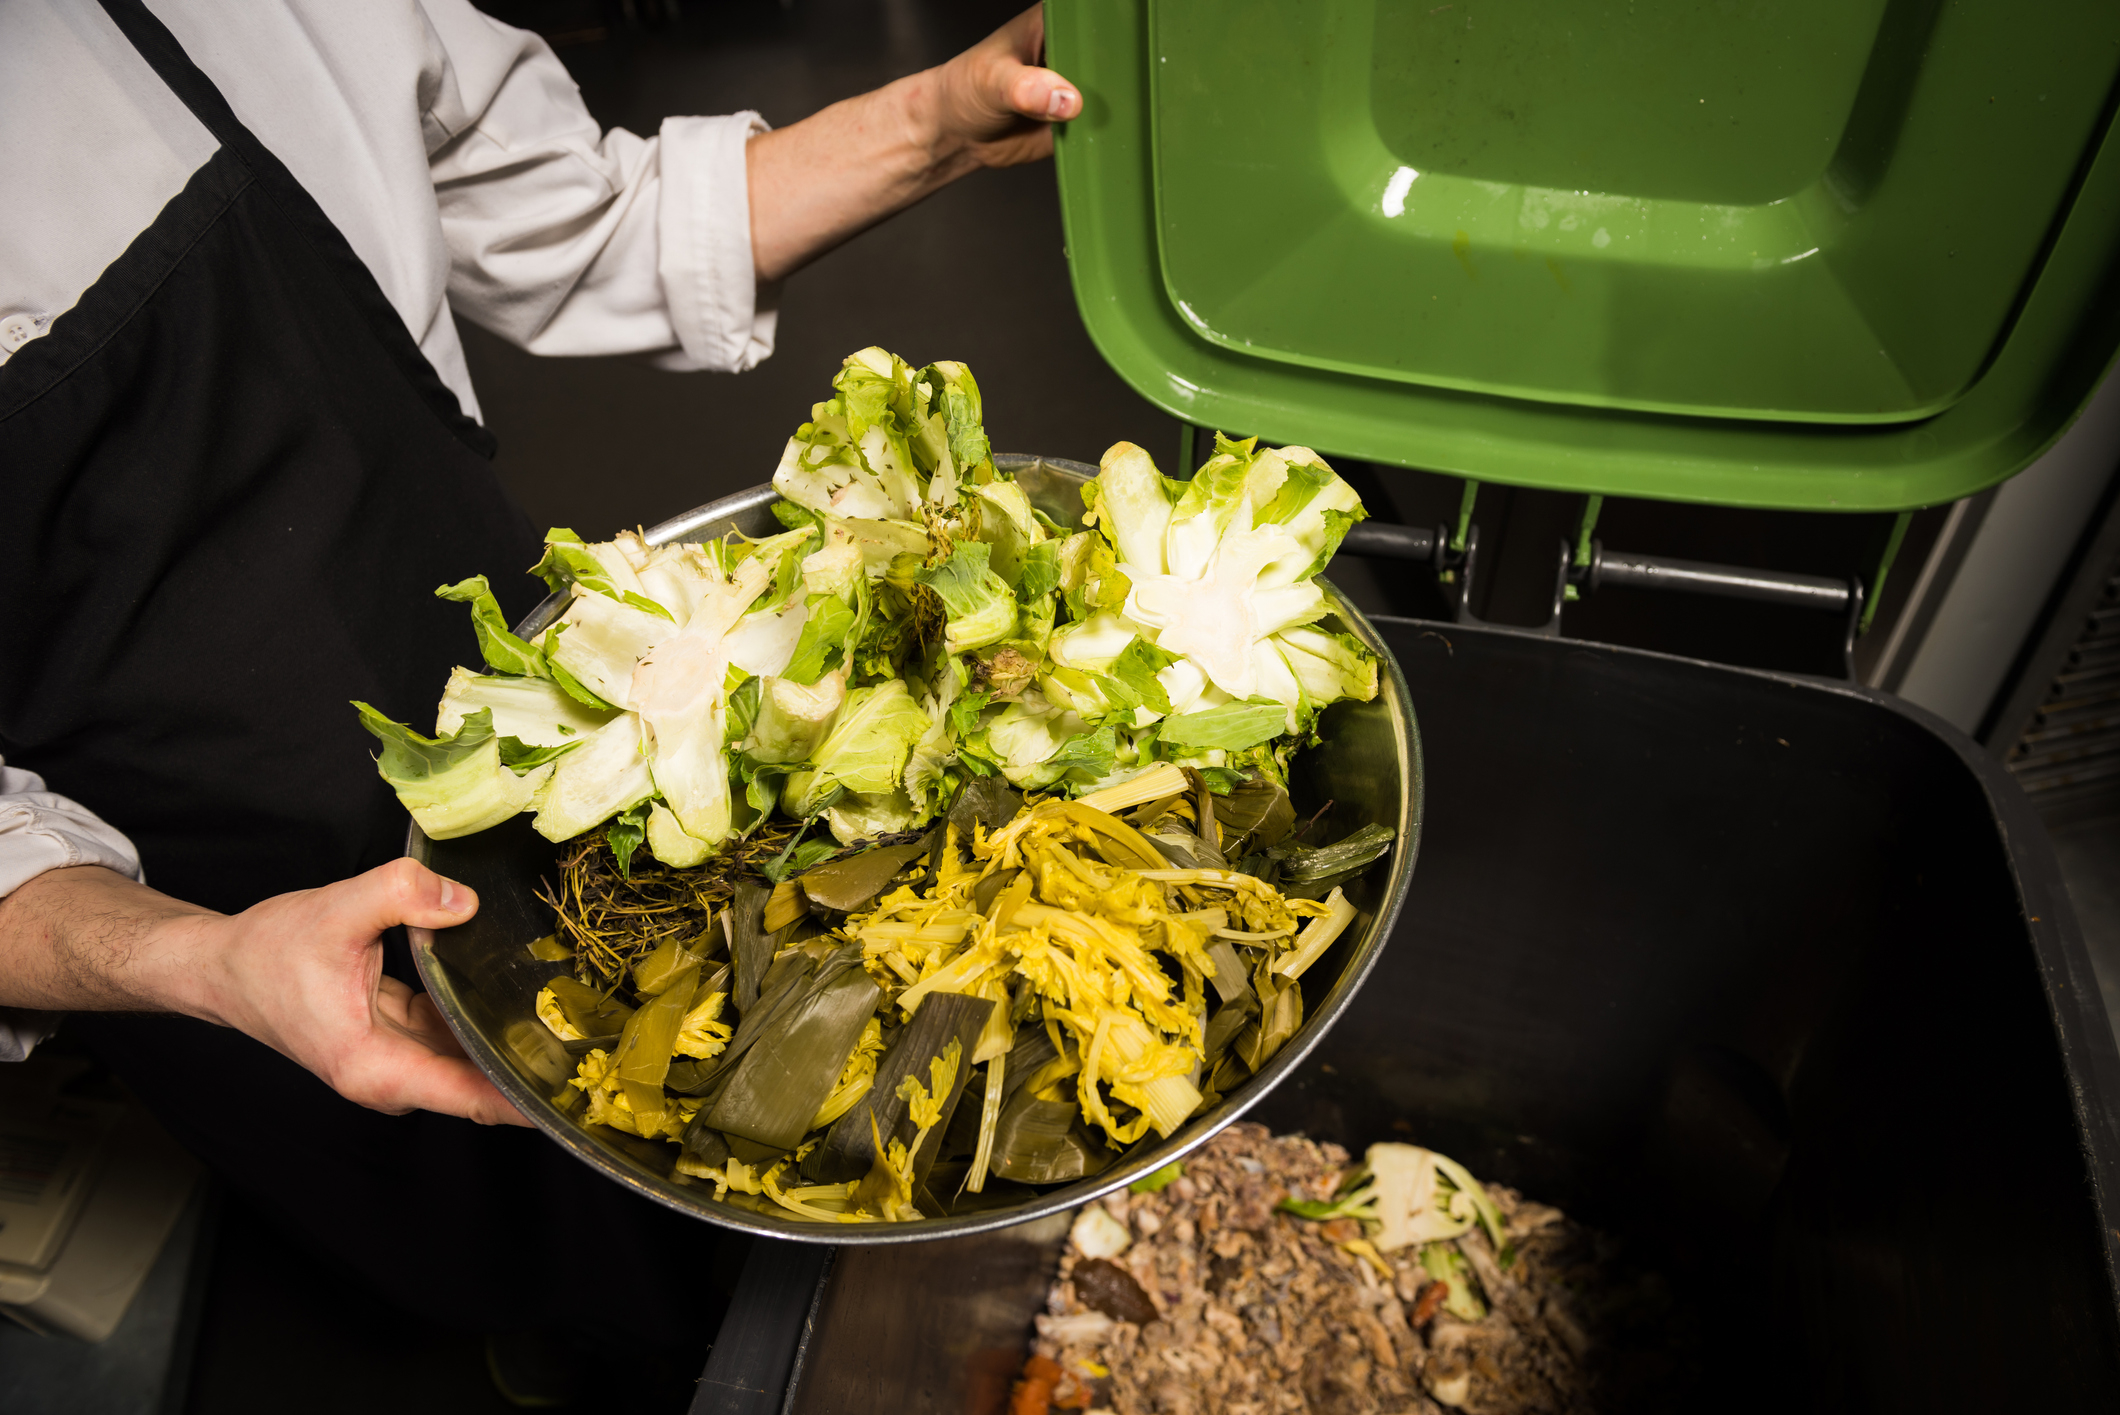 A person is tipping a bowl of food scraps into a green compost bin